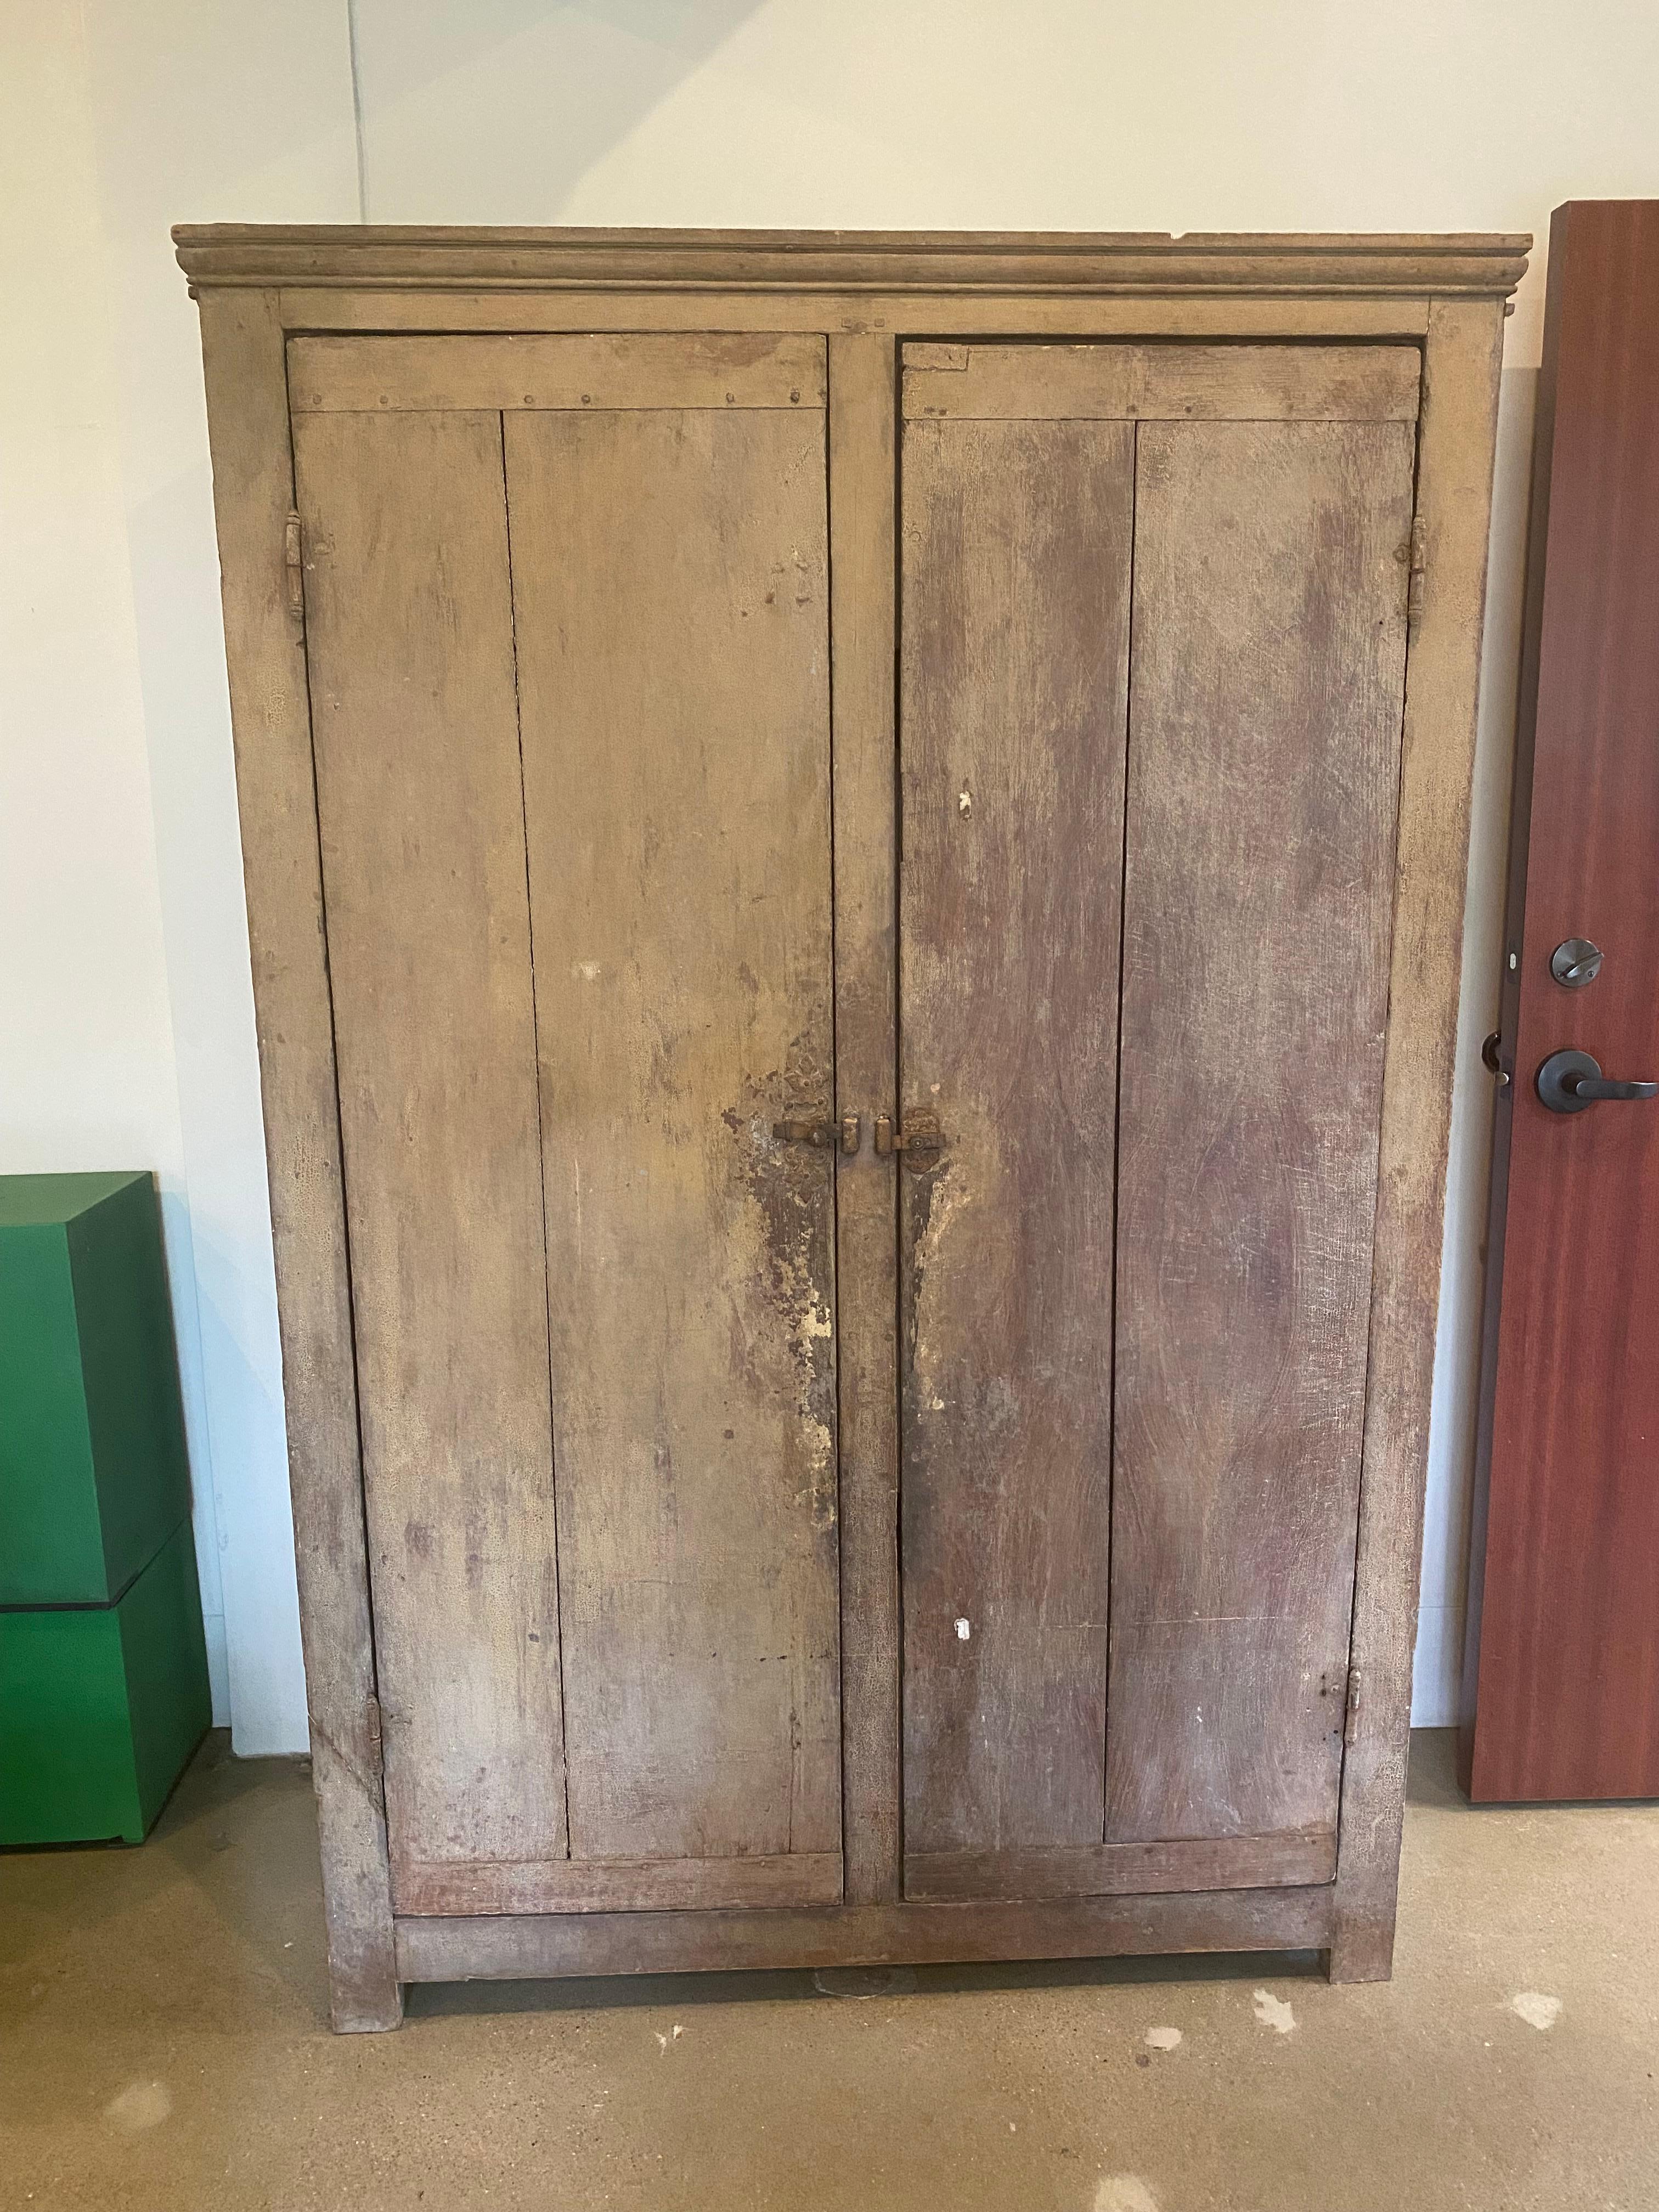 19th century Swedish cabinet in original painted finish with perfect patina. Two doors open to interior shelves. A simple, industrial cabinet with less detail than some Gustavian pieces of a similar finish. Steel latches and original barrel hinges.